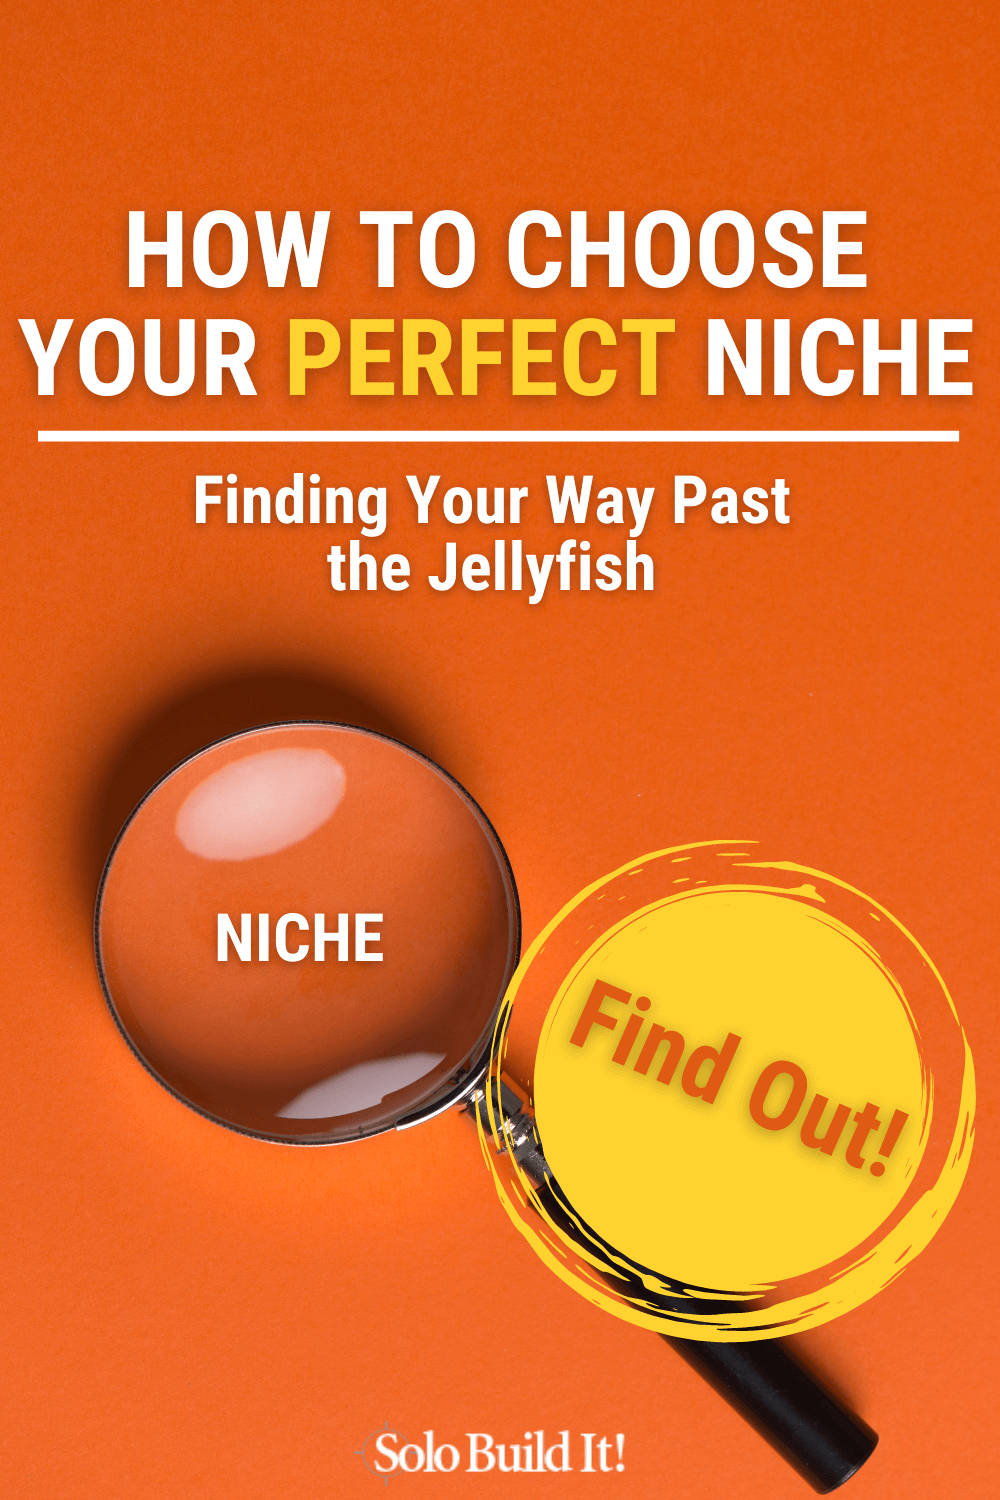 How to Choose a Niche in 3 Simple Steps